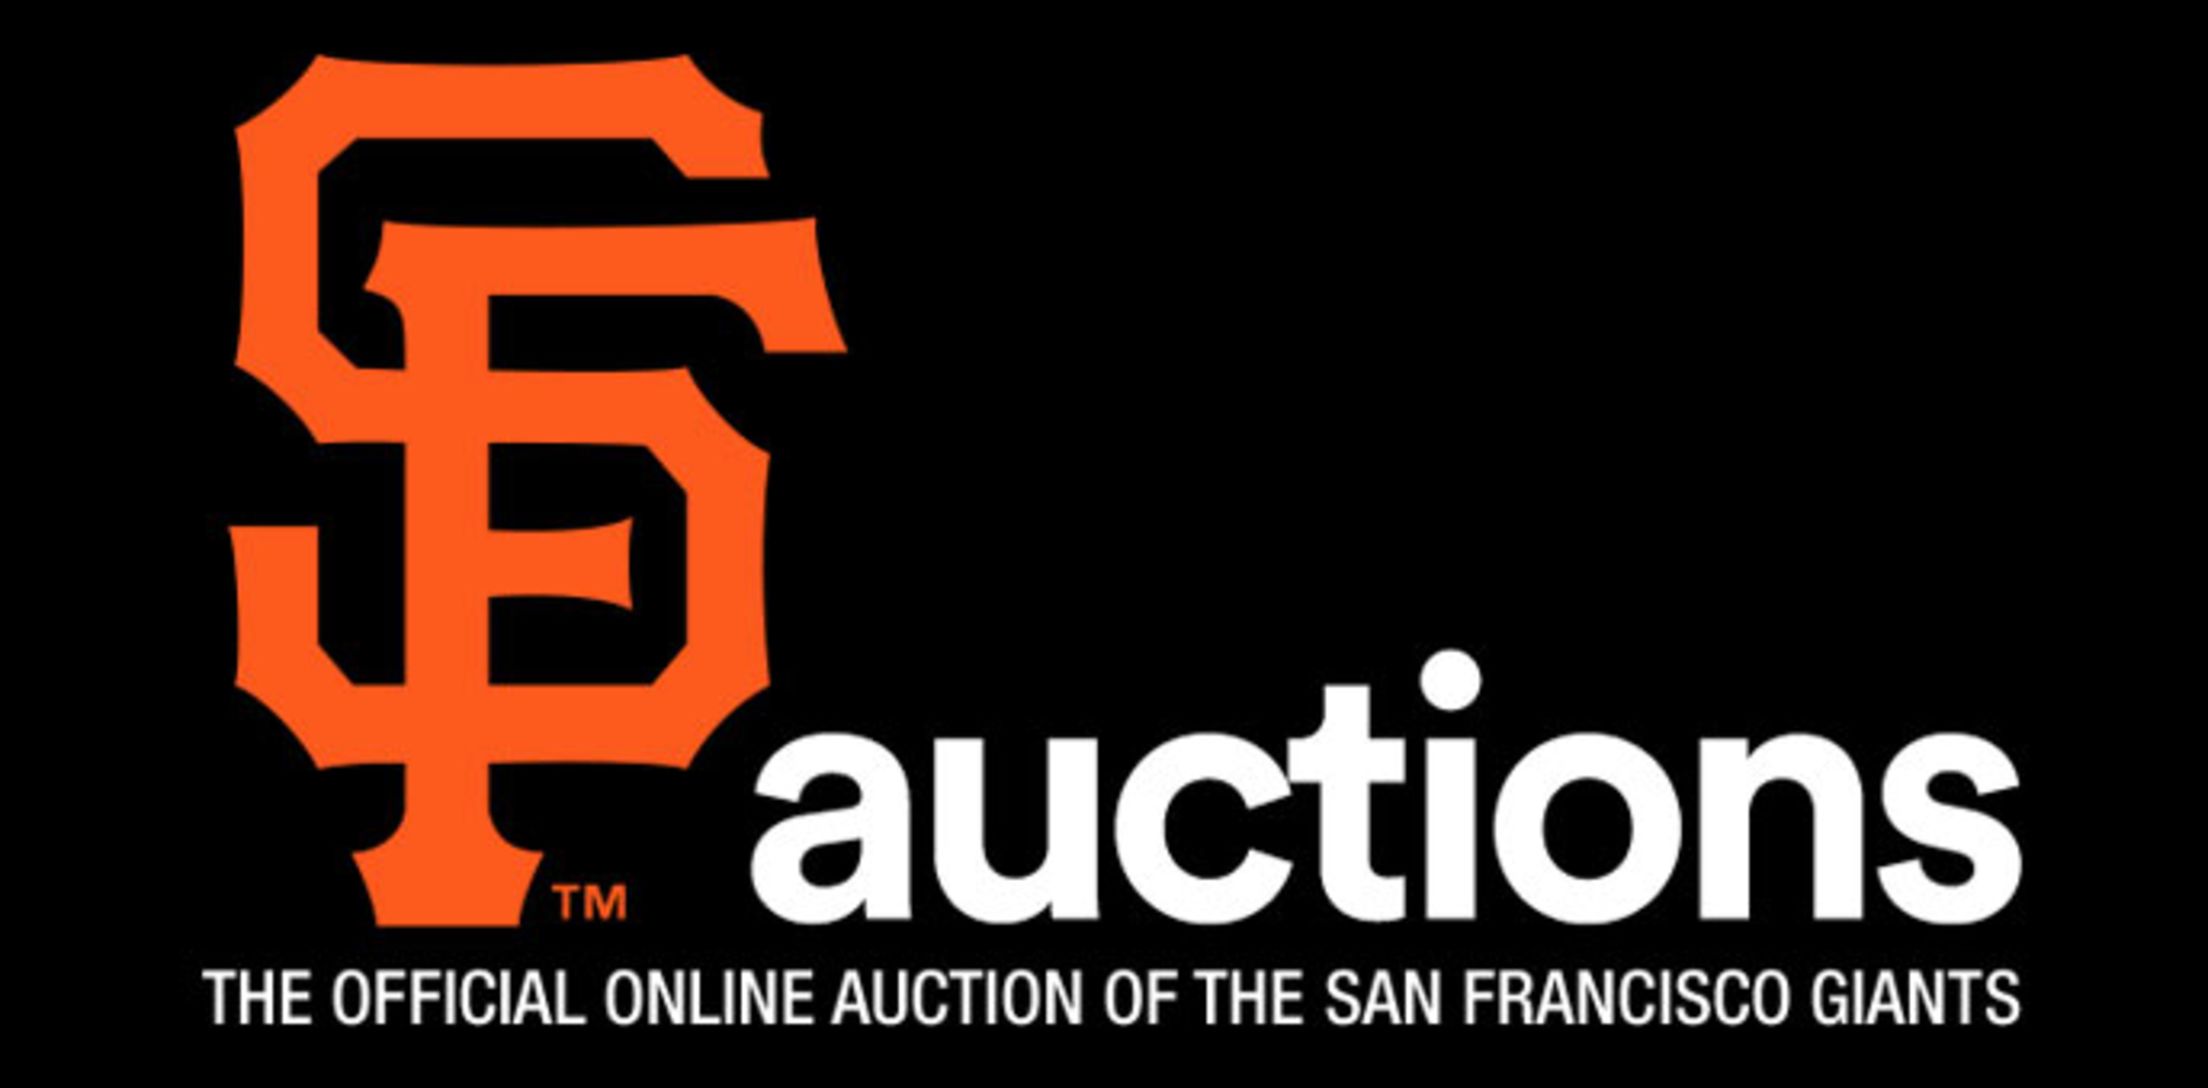 From The Clubhouse: Game-Used SF Giants Home Orange Alternate